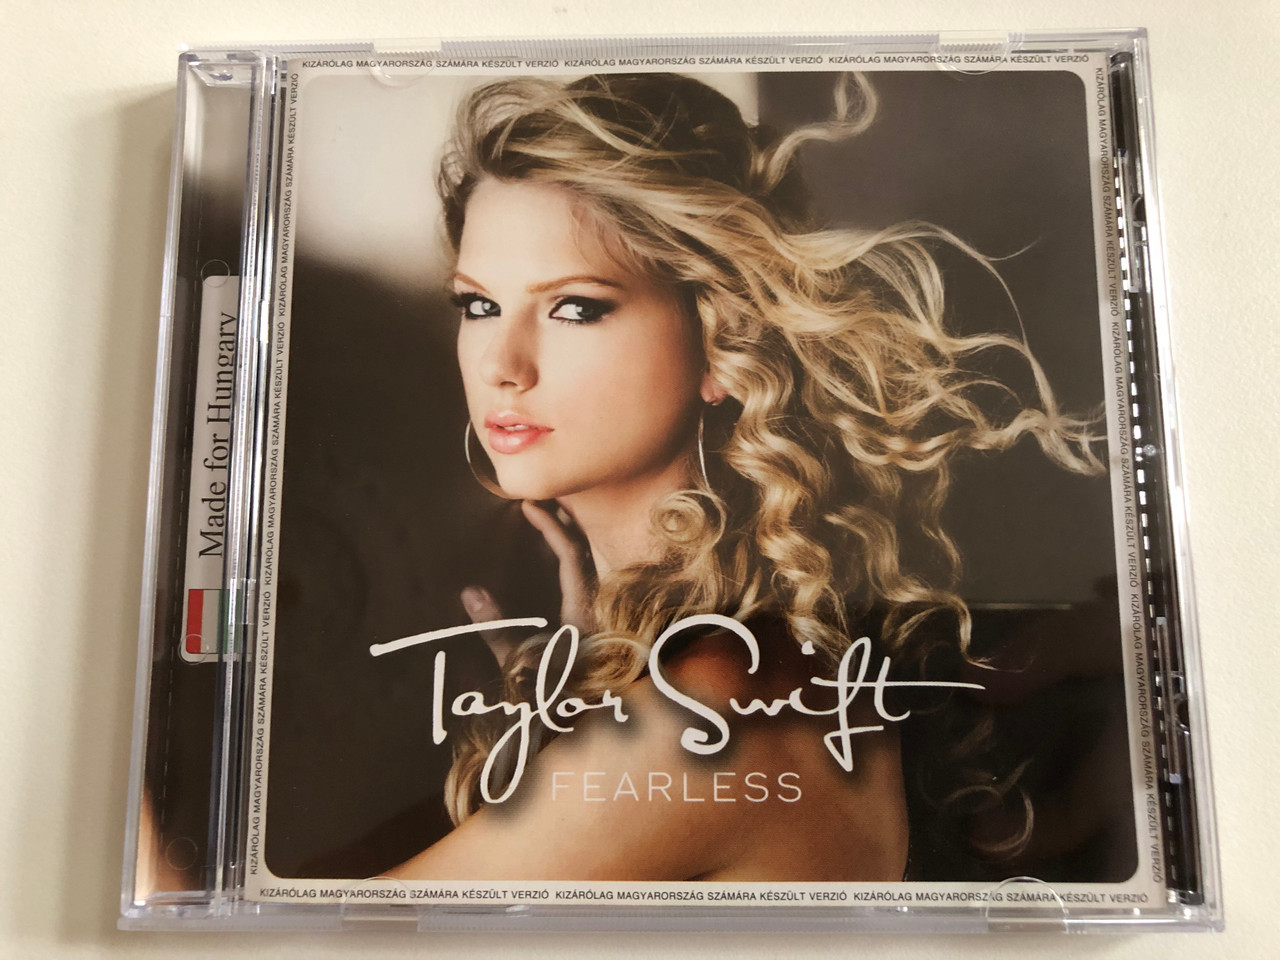 Taylor Swift - Fifteen (CD single), from the album Fearles…